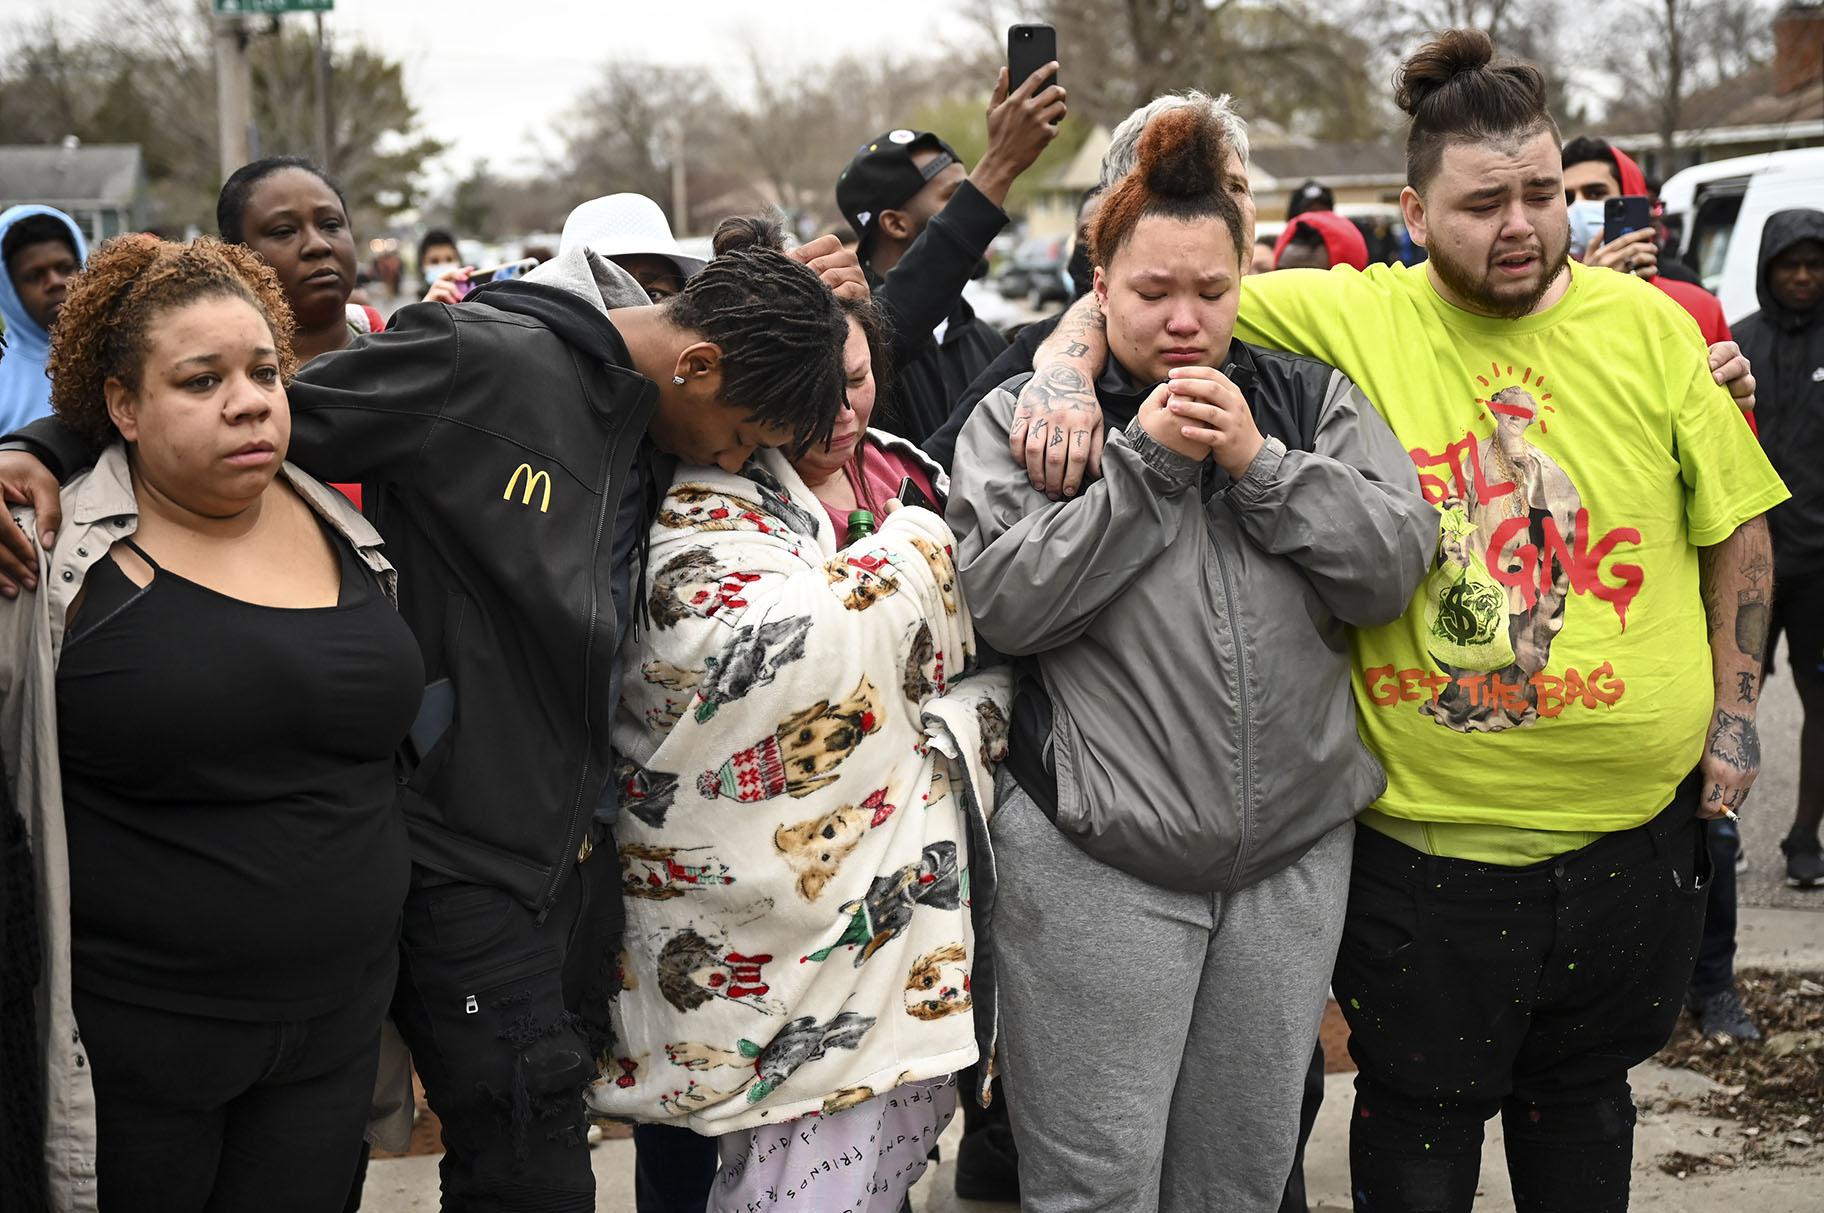 Family and friends of Daunte Wright, 20, grieve at 63rd Avenue North and Lee Avenue North hours after they say he was shot and killed by police, Sunday, April 11, 2021, in Brooklyn Center, Minn. Wright’s mother, Katie Wright, stands at center. (Aaron Lavinsky / Star Tribune via AP)